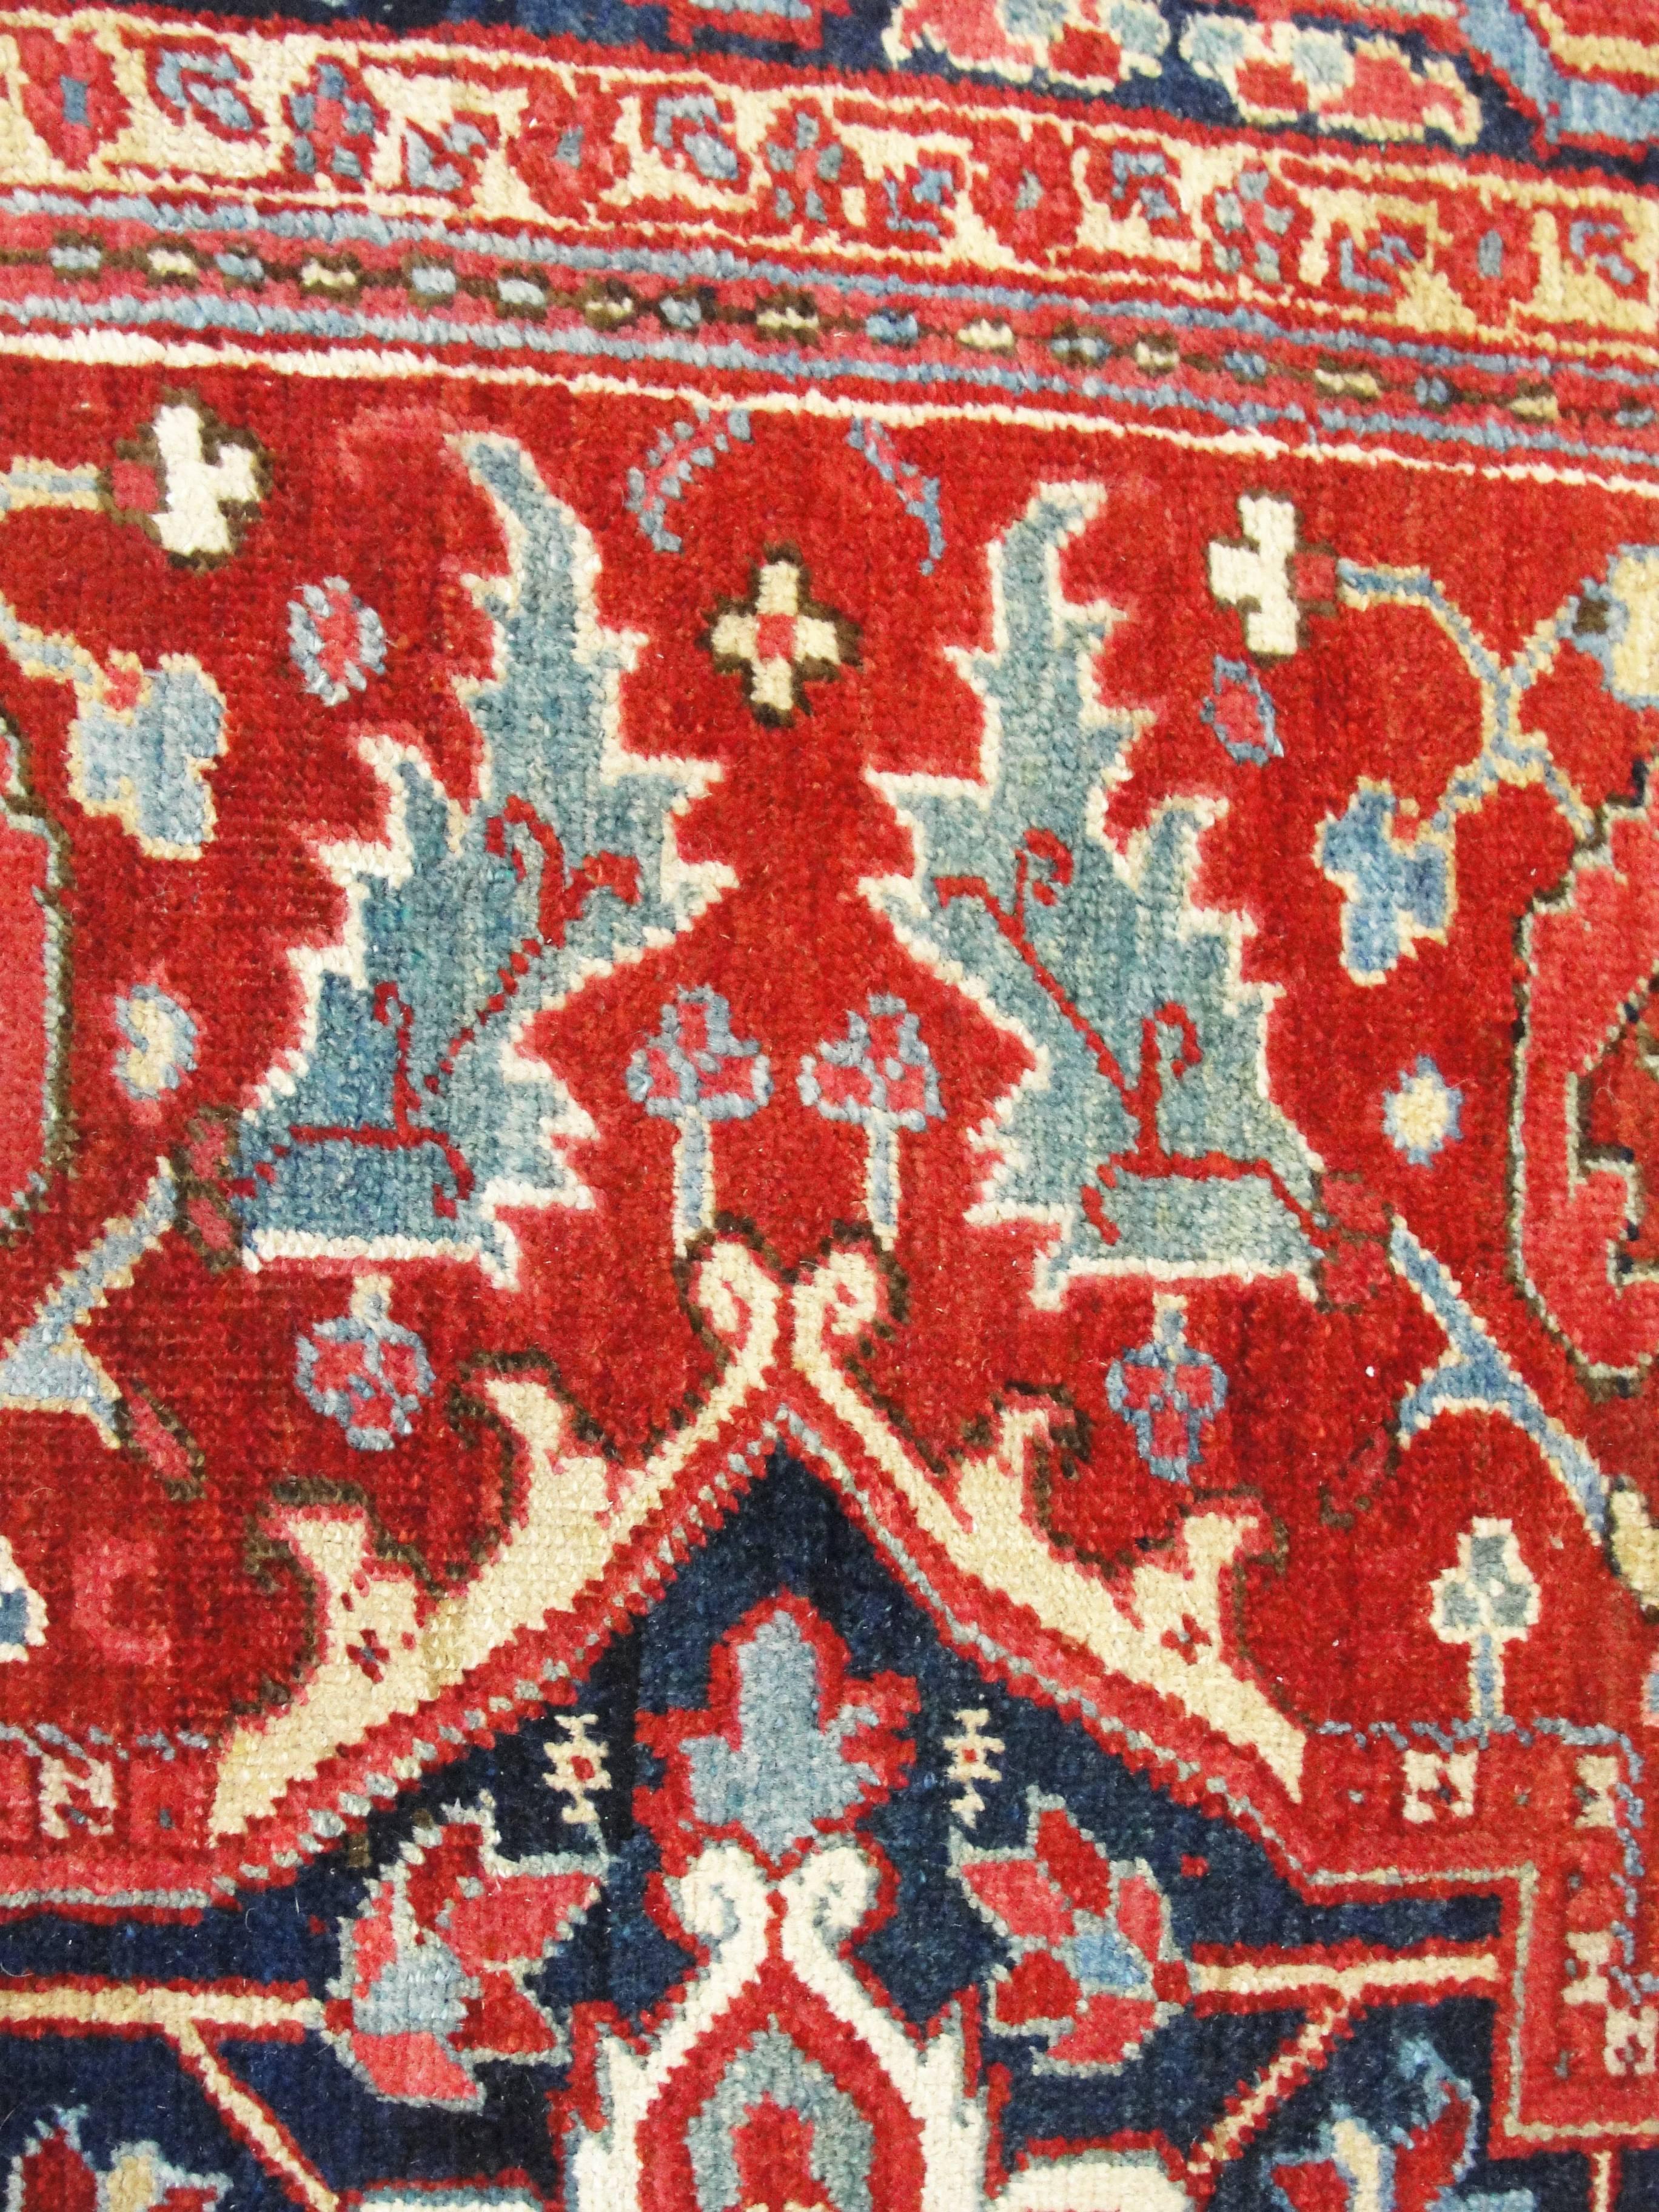 A charming antique Persian Heriz carpet it has a range of outstanding colors. A great painting is measure by beauty of its colors and the same statement goes for this rug. Heriz rugs are Persian rugs from the area of Heriz, East Azerbaijan in